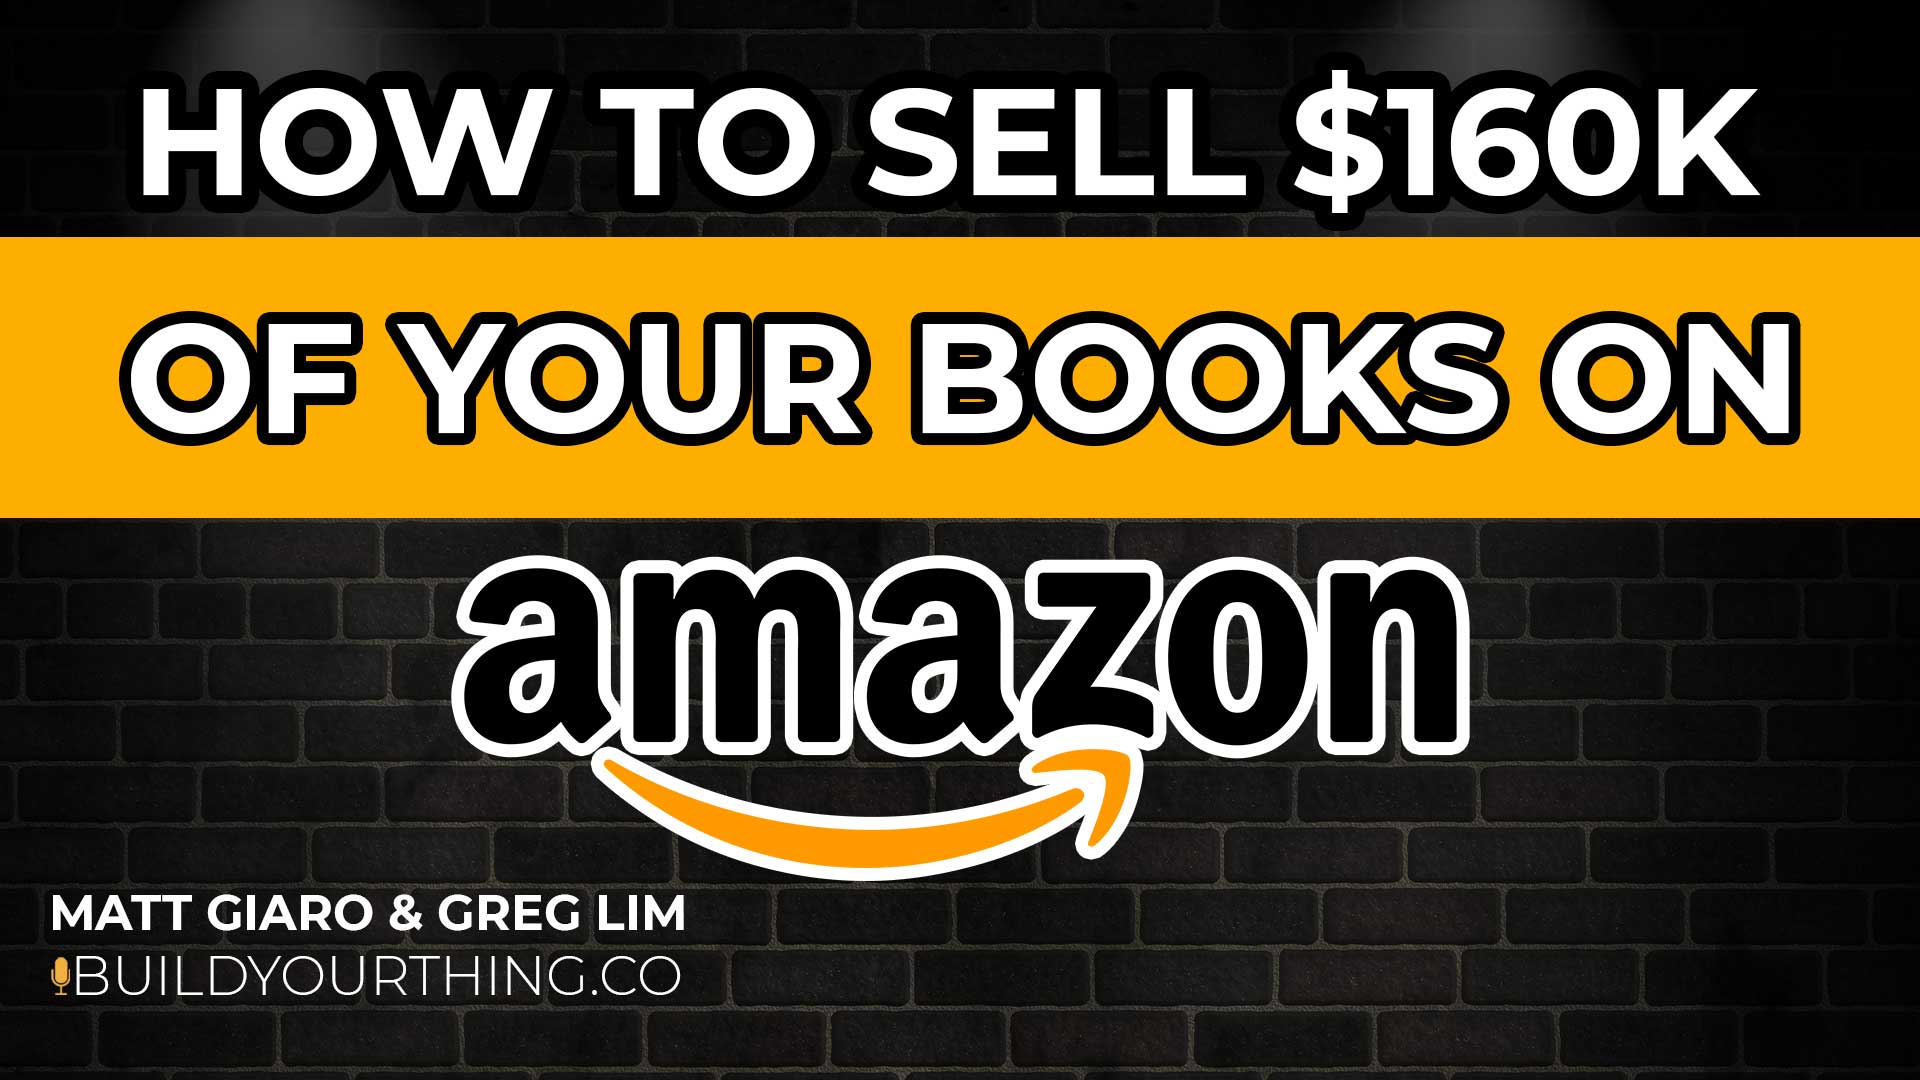 How to Sell $160,000 of Your Books on Amazon With Greg Lim